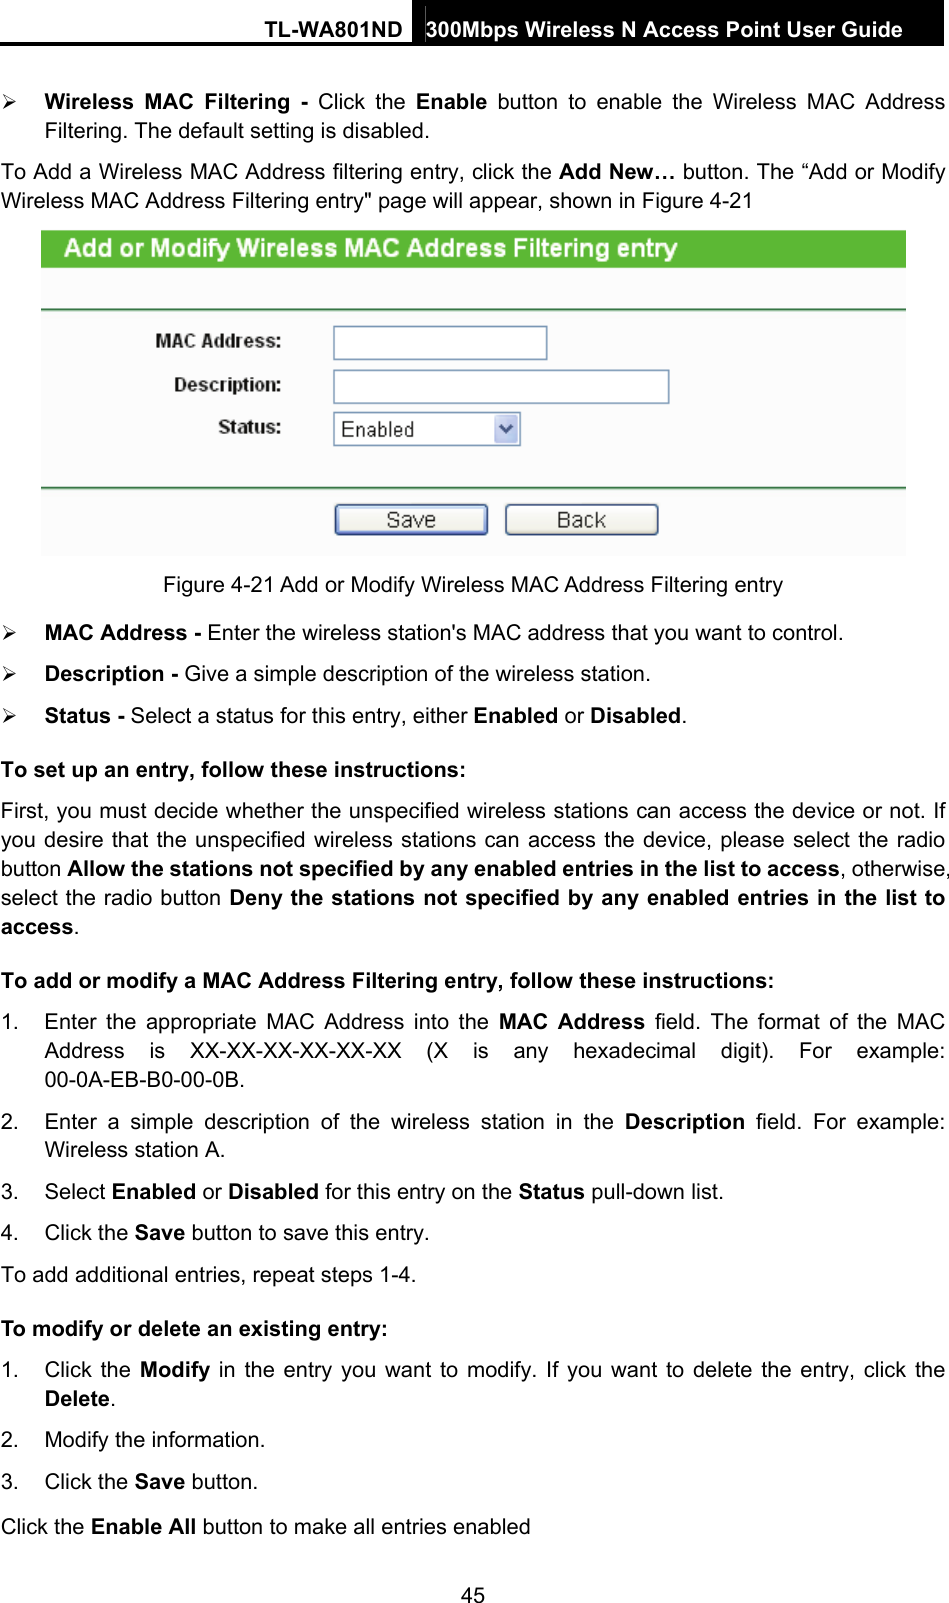 TL-WA801ND 300Mbps Wireless N Access Point User Guide  45 ¾ Wireless MAC Filtering - Click the Enable button to enable the Wireless MAC Address Filtering. The default setting is disabled. To Add a Wireless MAC Address filtering entry, click the Add New… button. The “Add or Modify Wireless MAC Address Filtering entry&quot; page will appear, shown in Figure 4-21  Figure 4-21 Add or Modify Wireless MAC Address Filtering entry ¾ MAC Address - Enter the wireless station&apos;s MAC address that you want to control.   ¾ Description - Give a simple description of the wireless station.   ¾ Status - Select a status for this entry, either Enabled or Disabled. To set up an entry, follow these instructions:   First, you must decide whether the unspecified wireless stations can access the device or not. If you desire that the unspecified wireless stations can access the device, please select the radio button Allow the stations not specified by any enabled entries in the list to access, otherwise, select the radio button Deny the stations not specified by any enabled entries in the list to access. To add or modify a MAC Address Filtering entry, follow these instructions: 1.  Enter the appropriate MAC Address into the MAC Address field. The format of the MAC Address is XX-XX-XX-XX-XX-XX (X is any hexadecimal digit). For example: 00-0A-EB-B0-00-0B.  2.  Enter a simple description of the wireless station in the Description field. For example: Wireless station A. 3. Select Enabled or Disabled for this entry on the Status pull-down list. 4. Click the Save button to save this entry. To add additional entries, repeat steps 1-4. To modify or delete an existing entry: 1. Click the Modify in the entry you want to modify. If you want to delete the entry, click the Delete. 2.  Modify the information.   3. Click the Save button. Click the Enable All button to make all entries enabled 